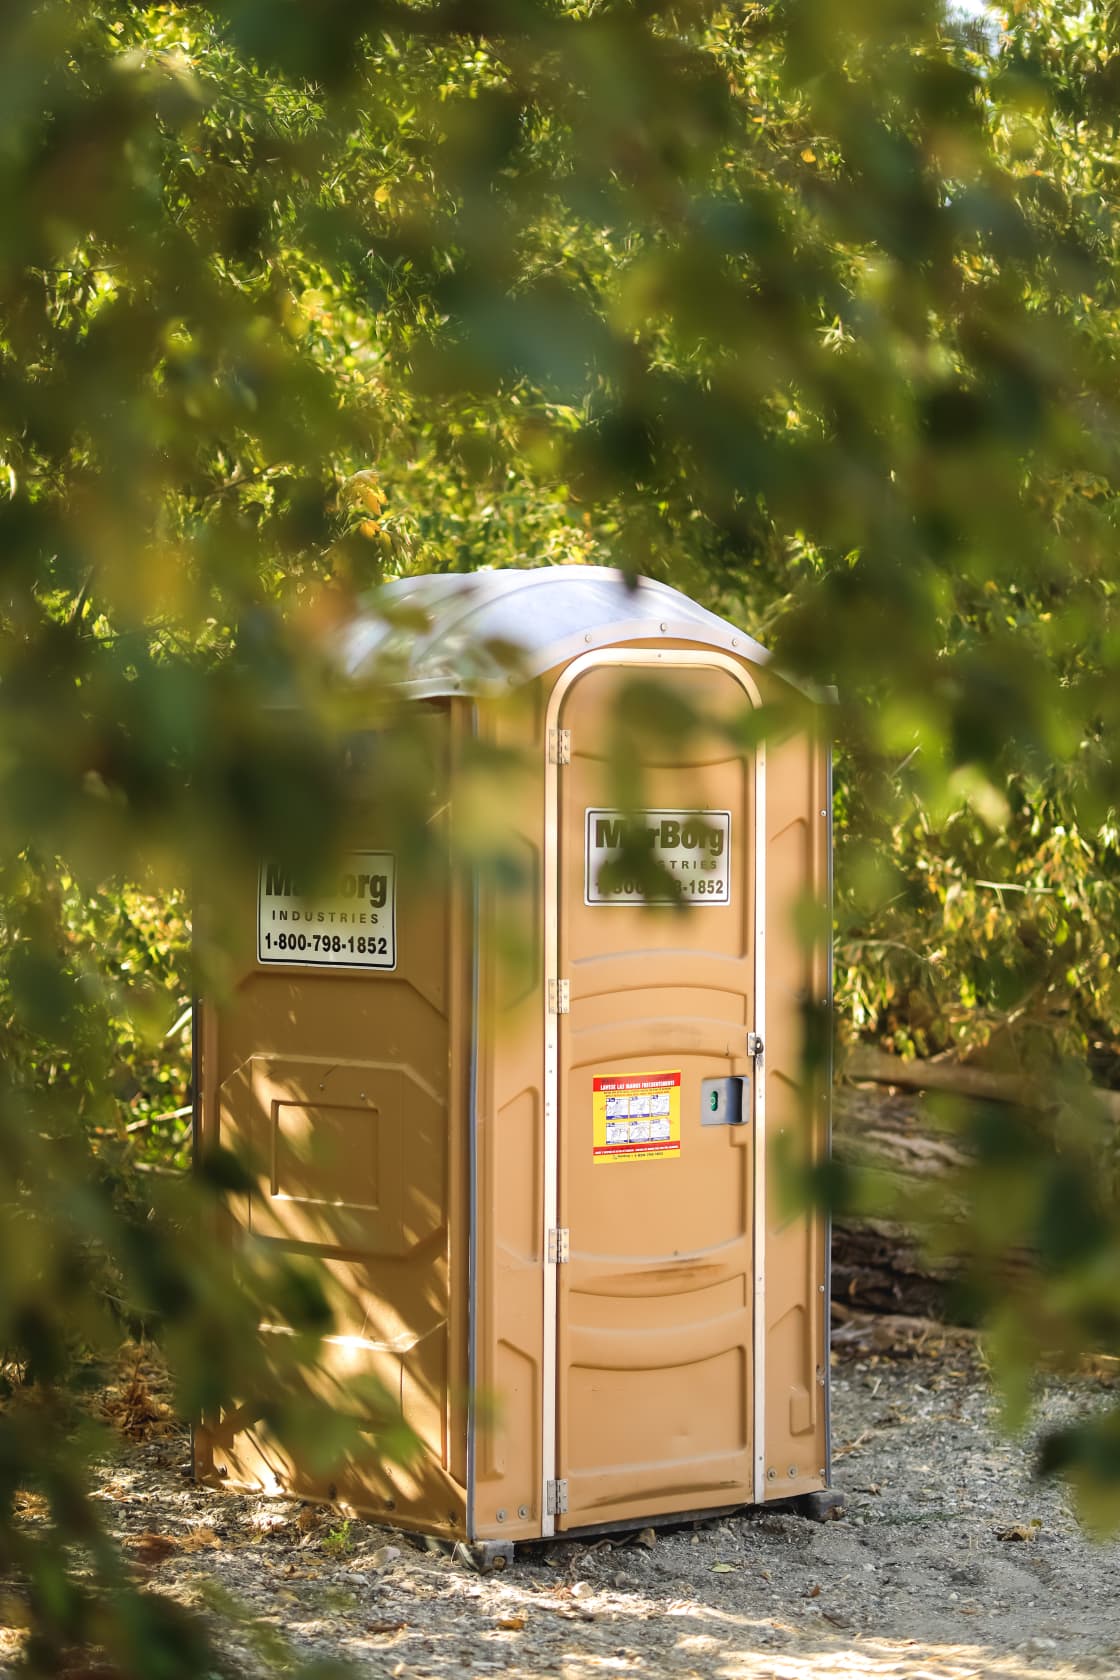 There is a very clean portable bathroom for the campsites to use! 